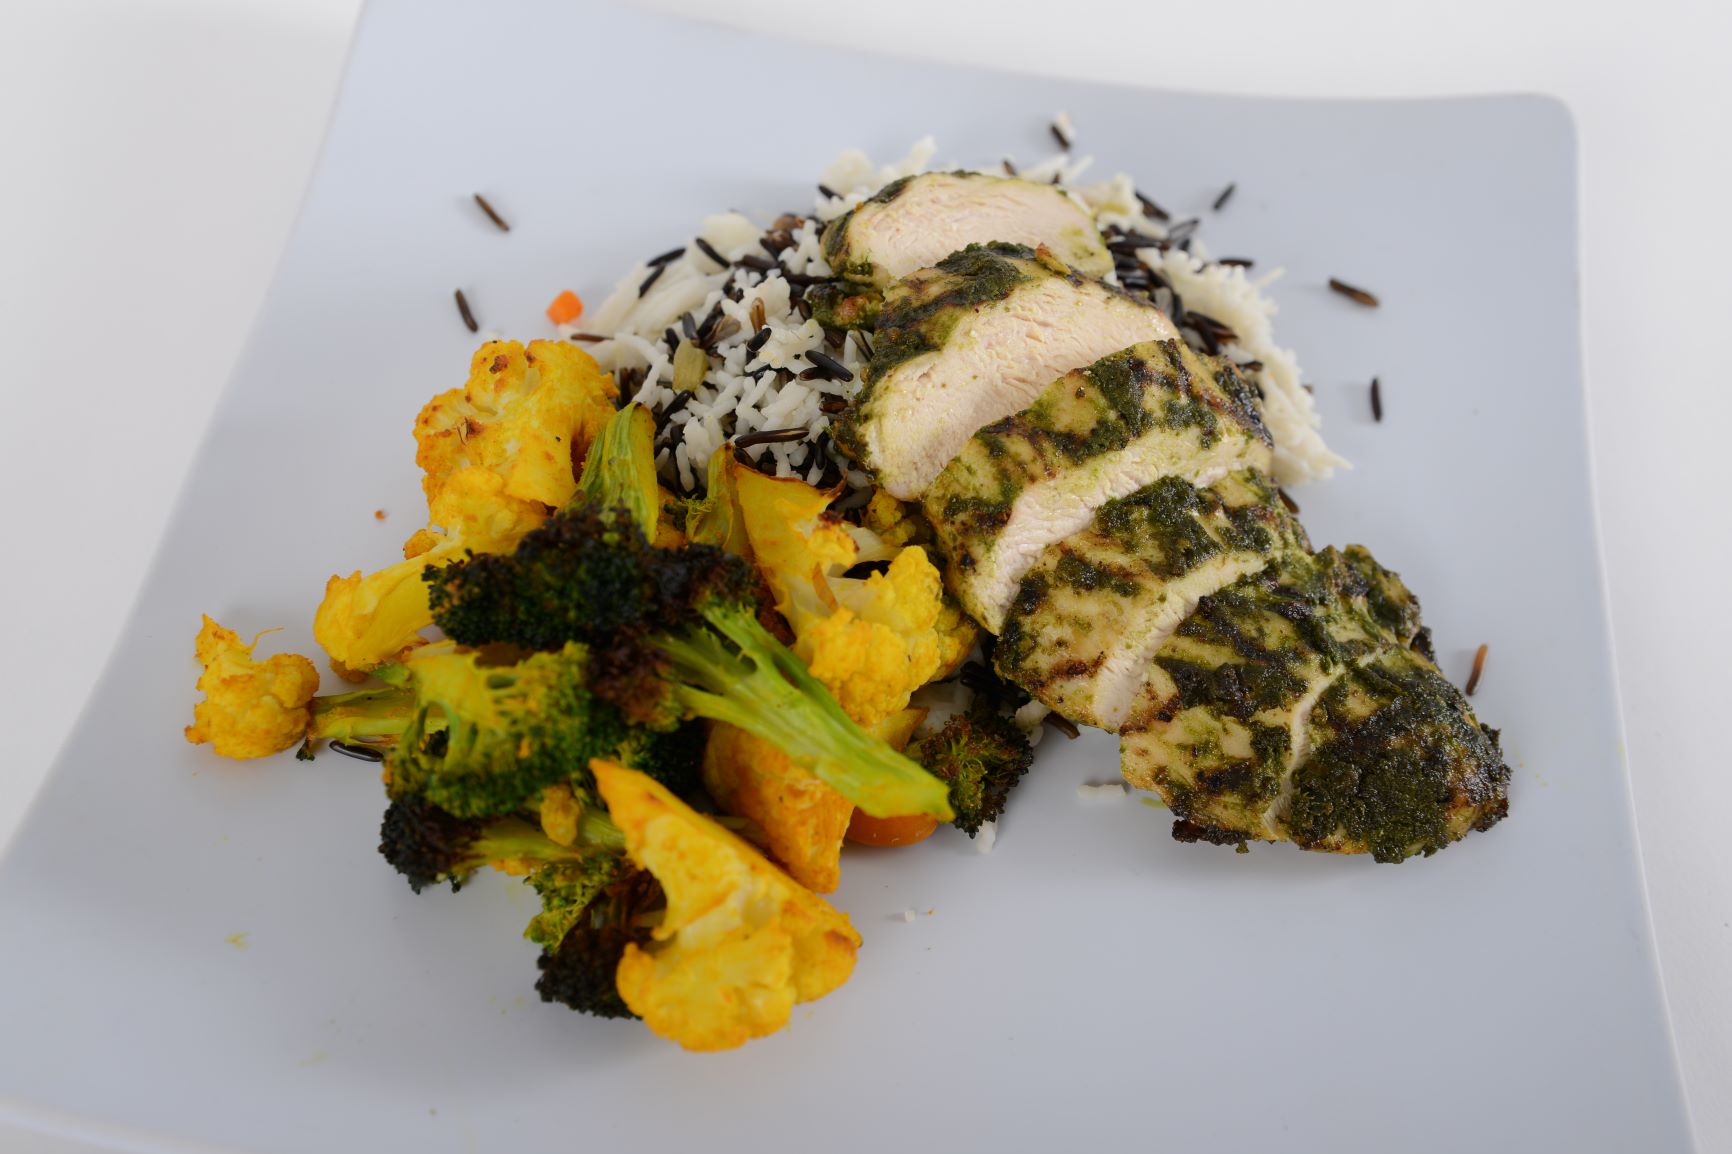 Grilled Chicken Pesto (Monday 10/9 Delivery)